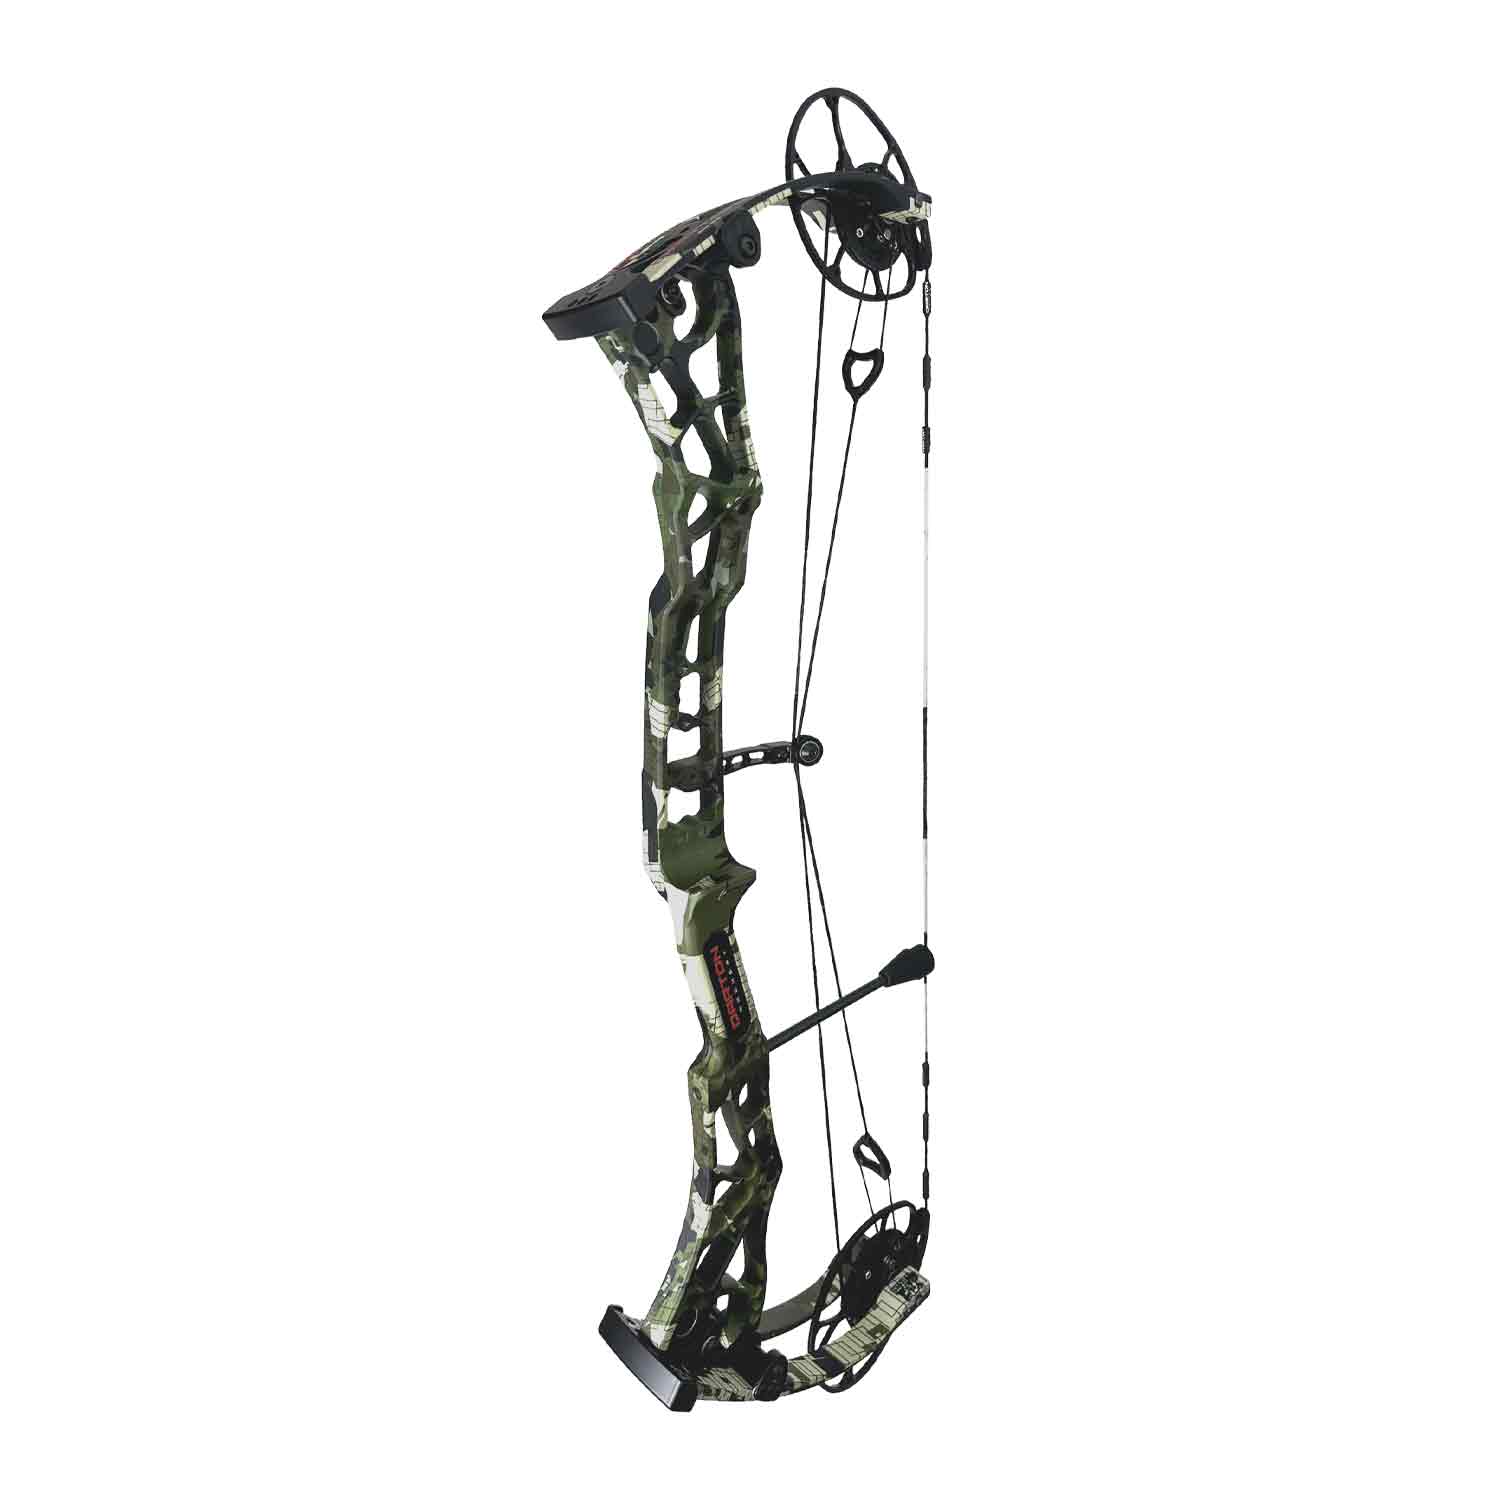 Darton Consequence Compound Hunting Bow